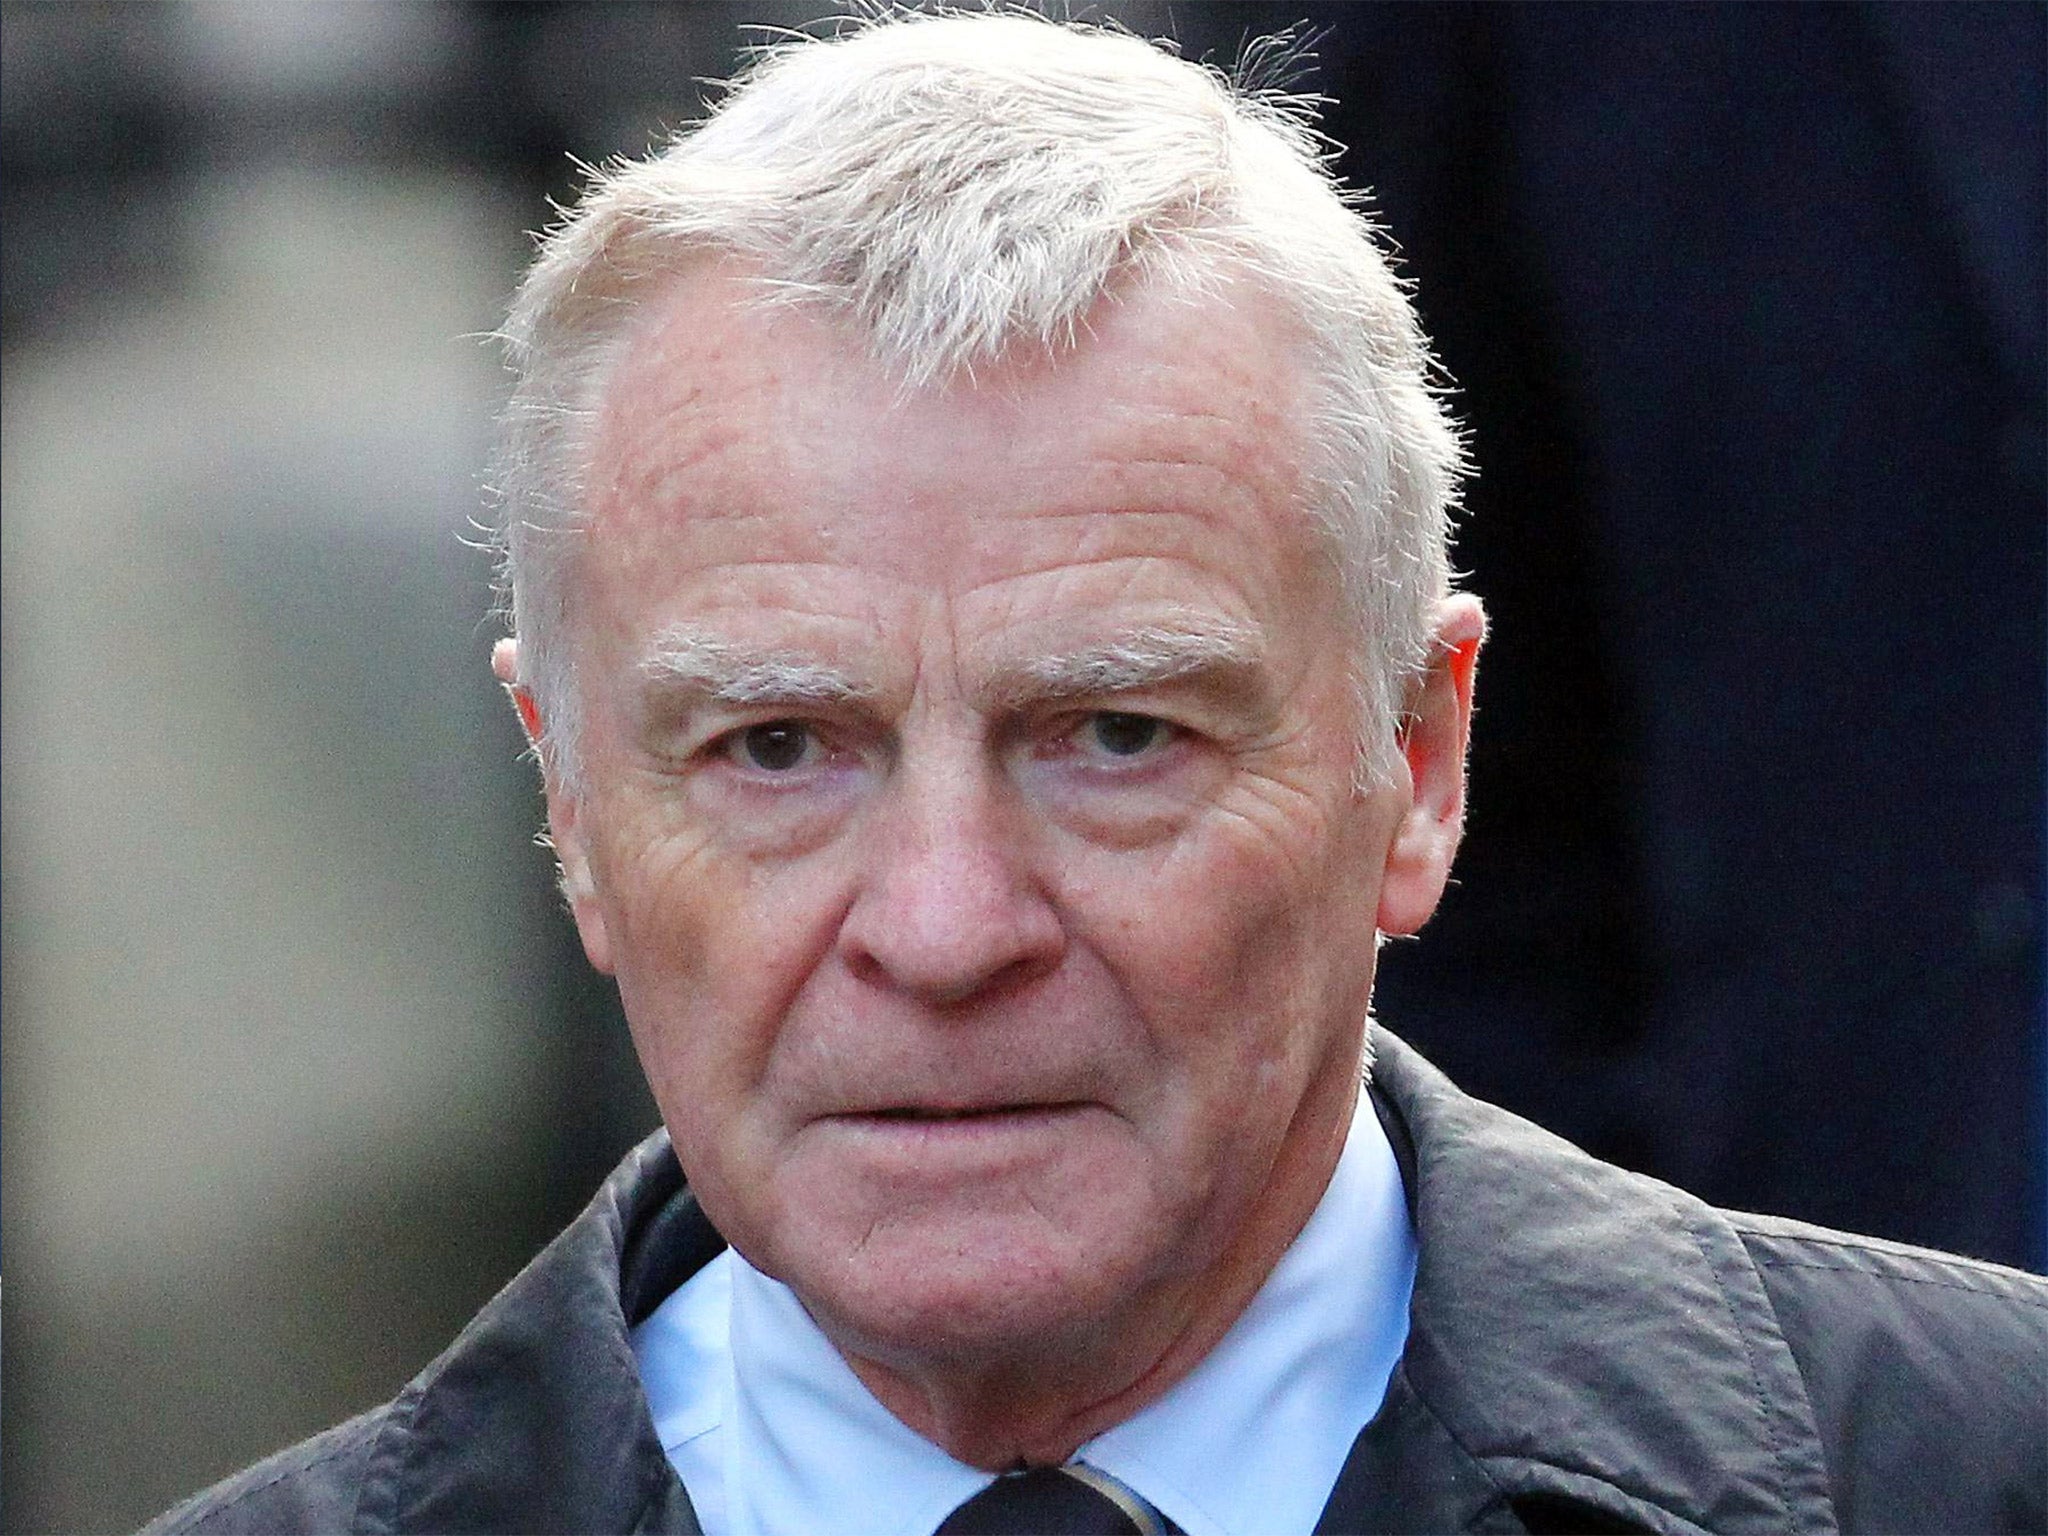 Max Mosley is suing Google for misuse of private information and breaches of the Data Protection Act